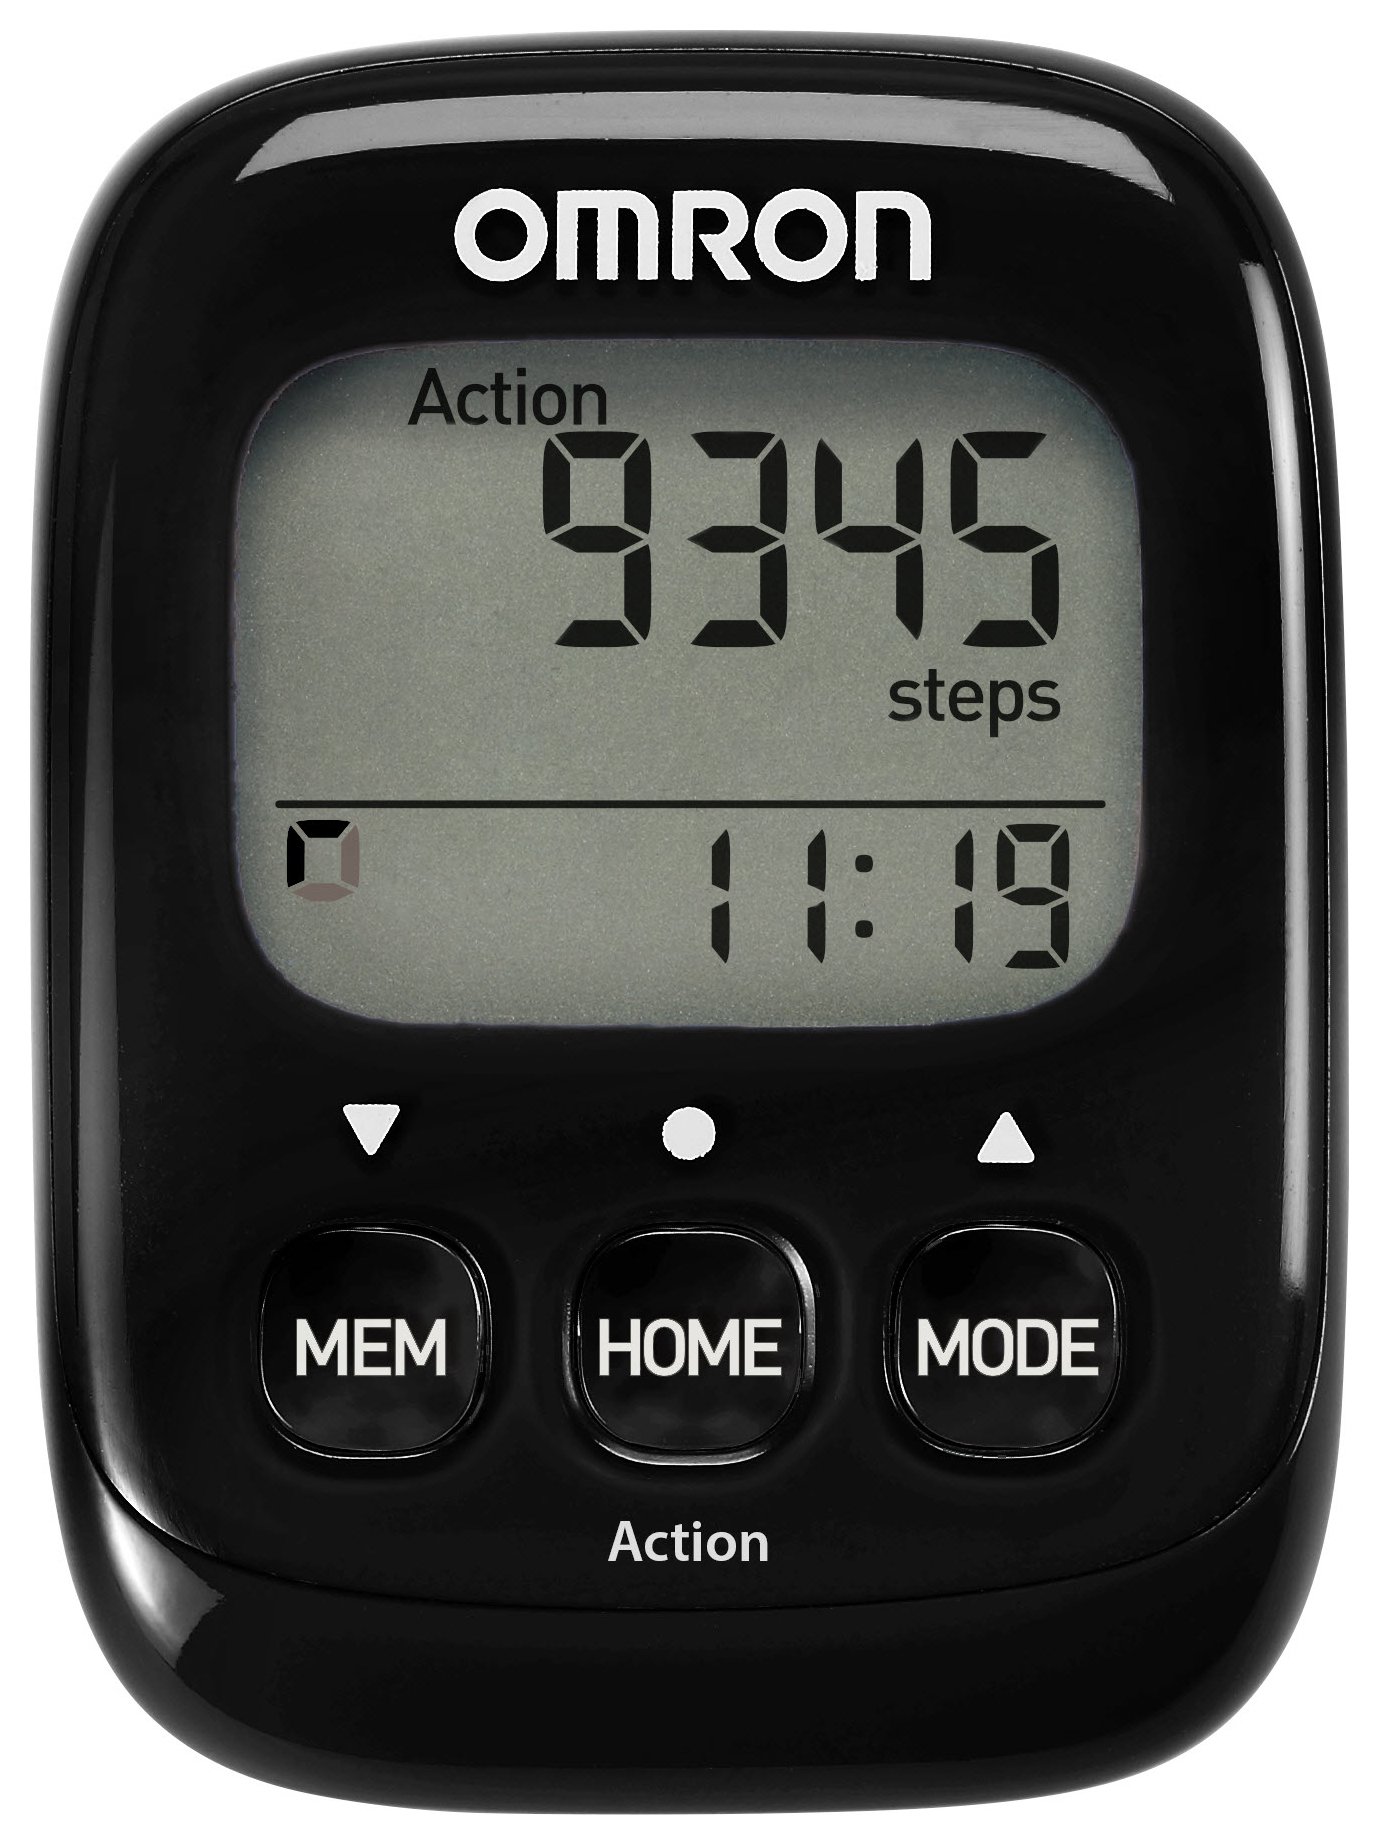 EAN 4015672110335 product image for Omron Walking Style IV Pedometer BLK | upcitemdb.com